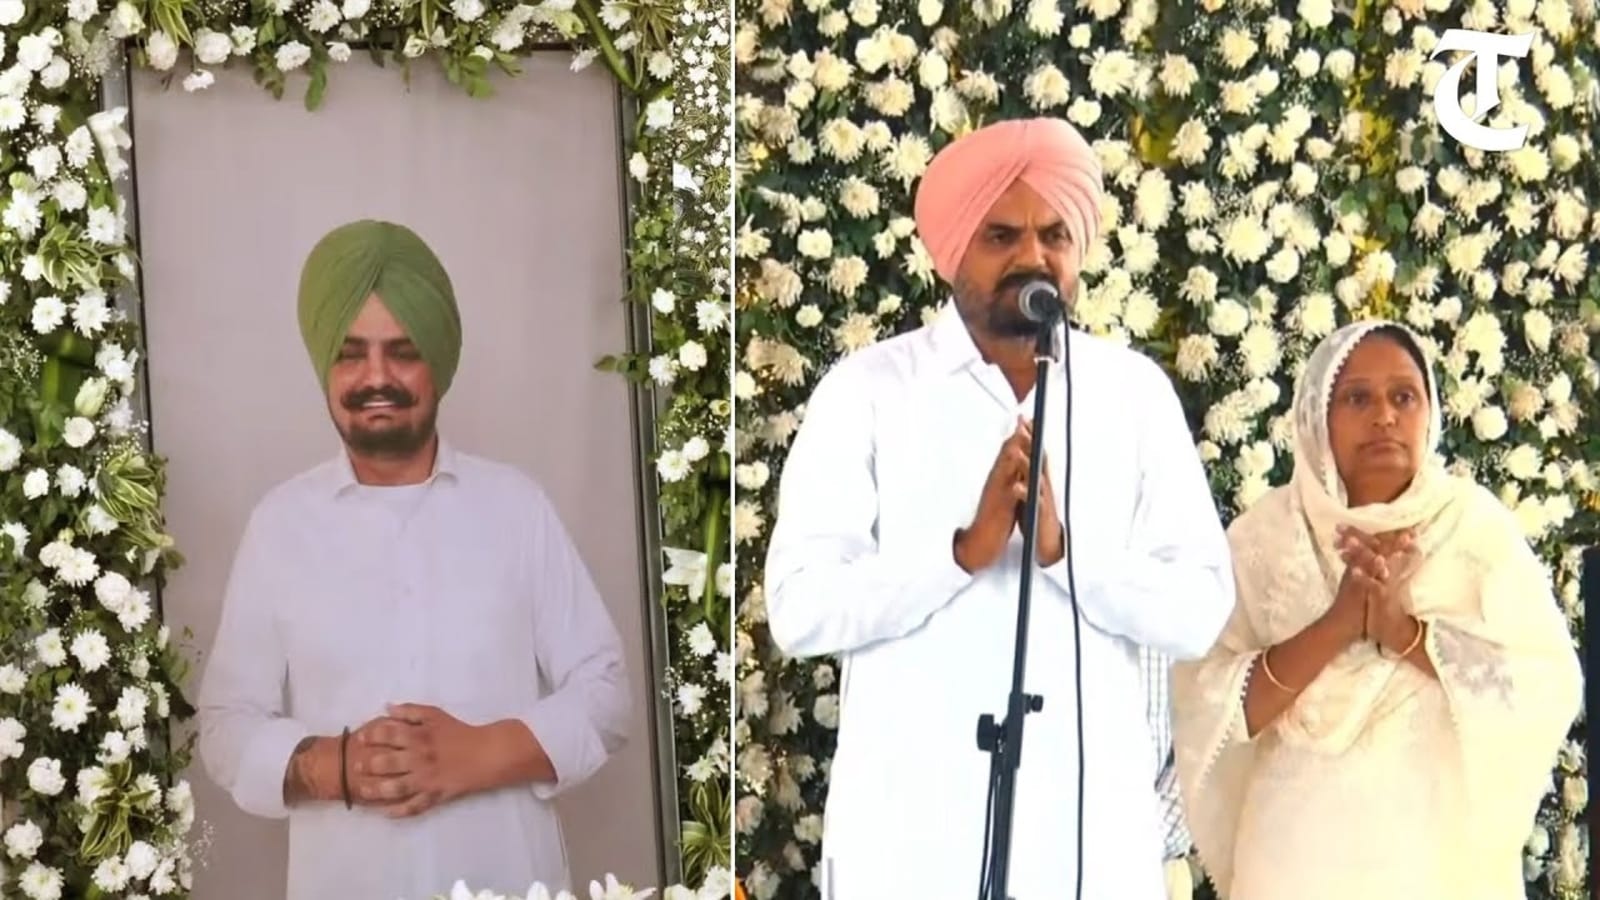 Sidhu Moose Wala’s father says ‘I am ruined’ after son’s death: ‘He hugged me and cried’